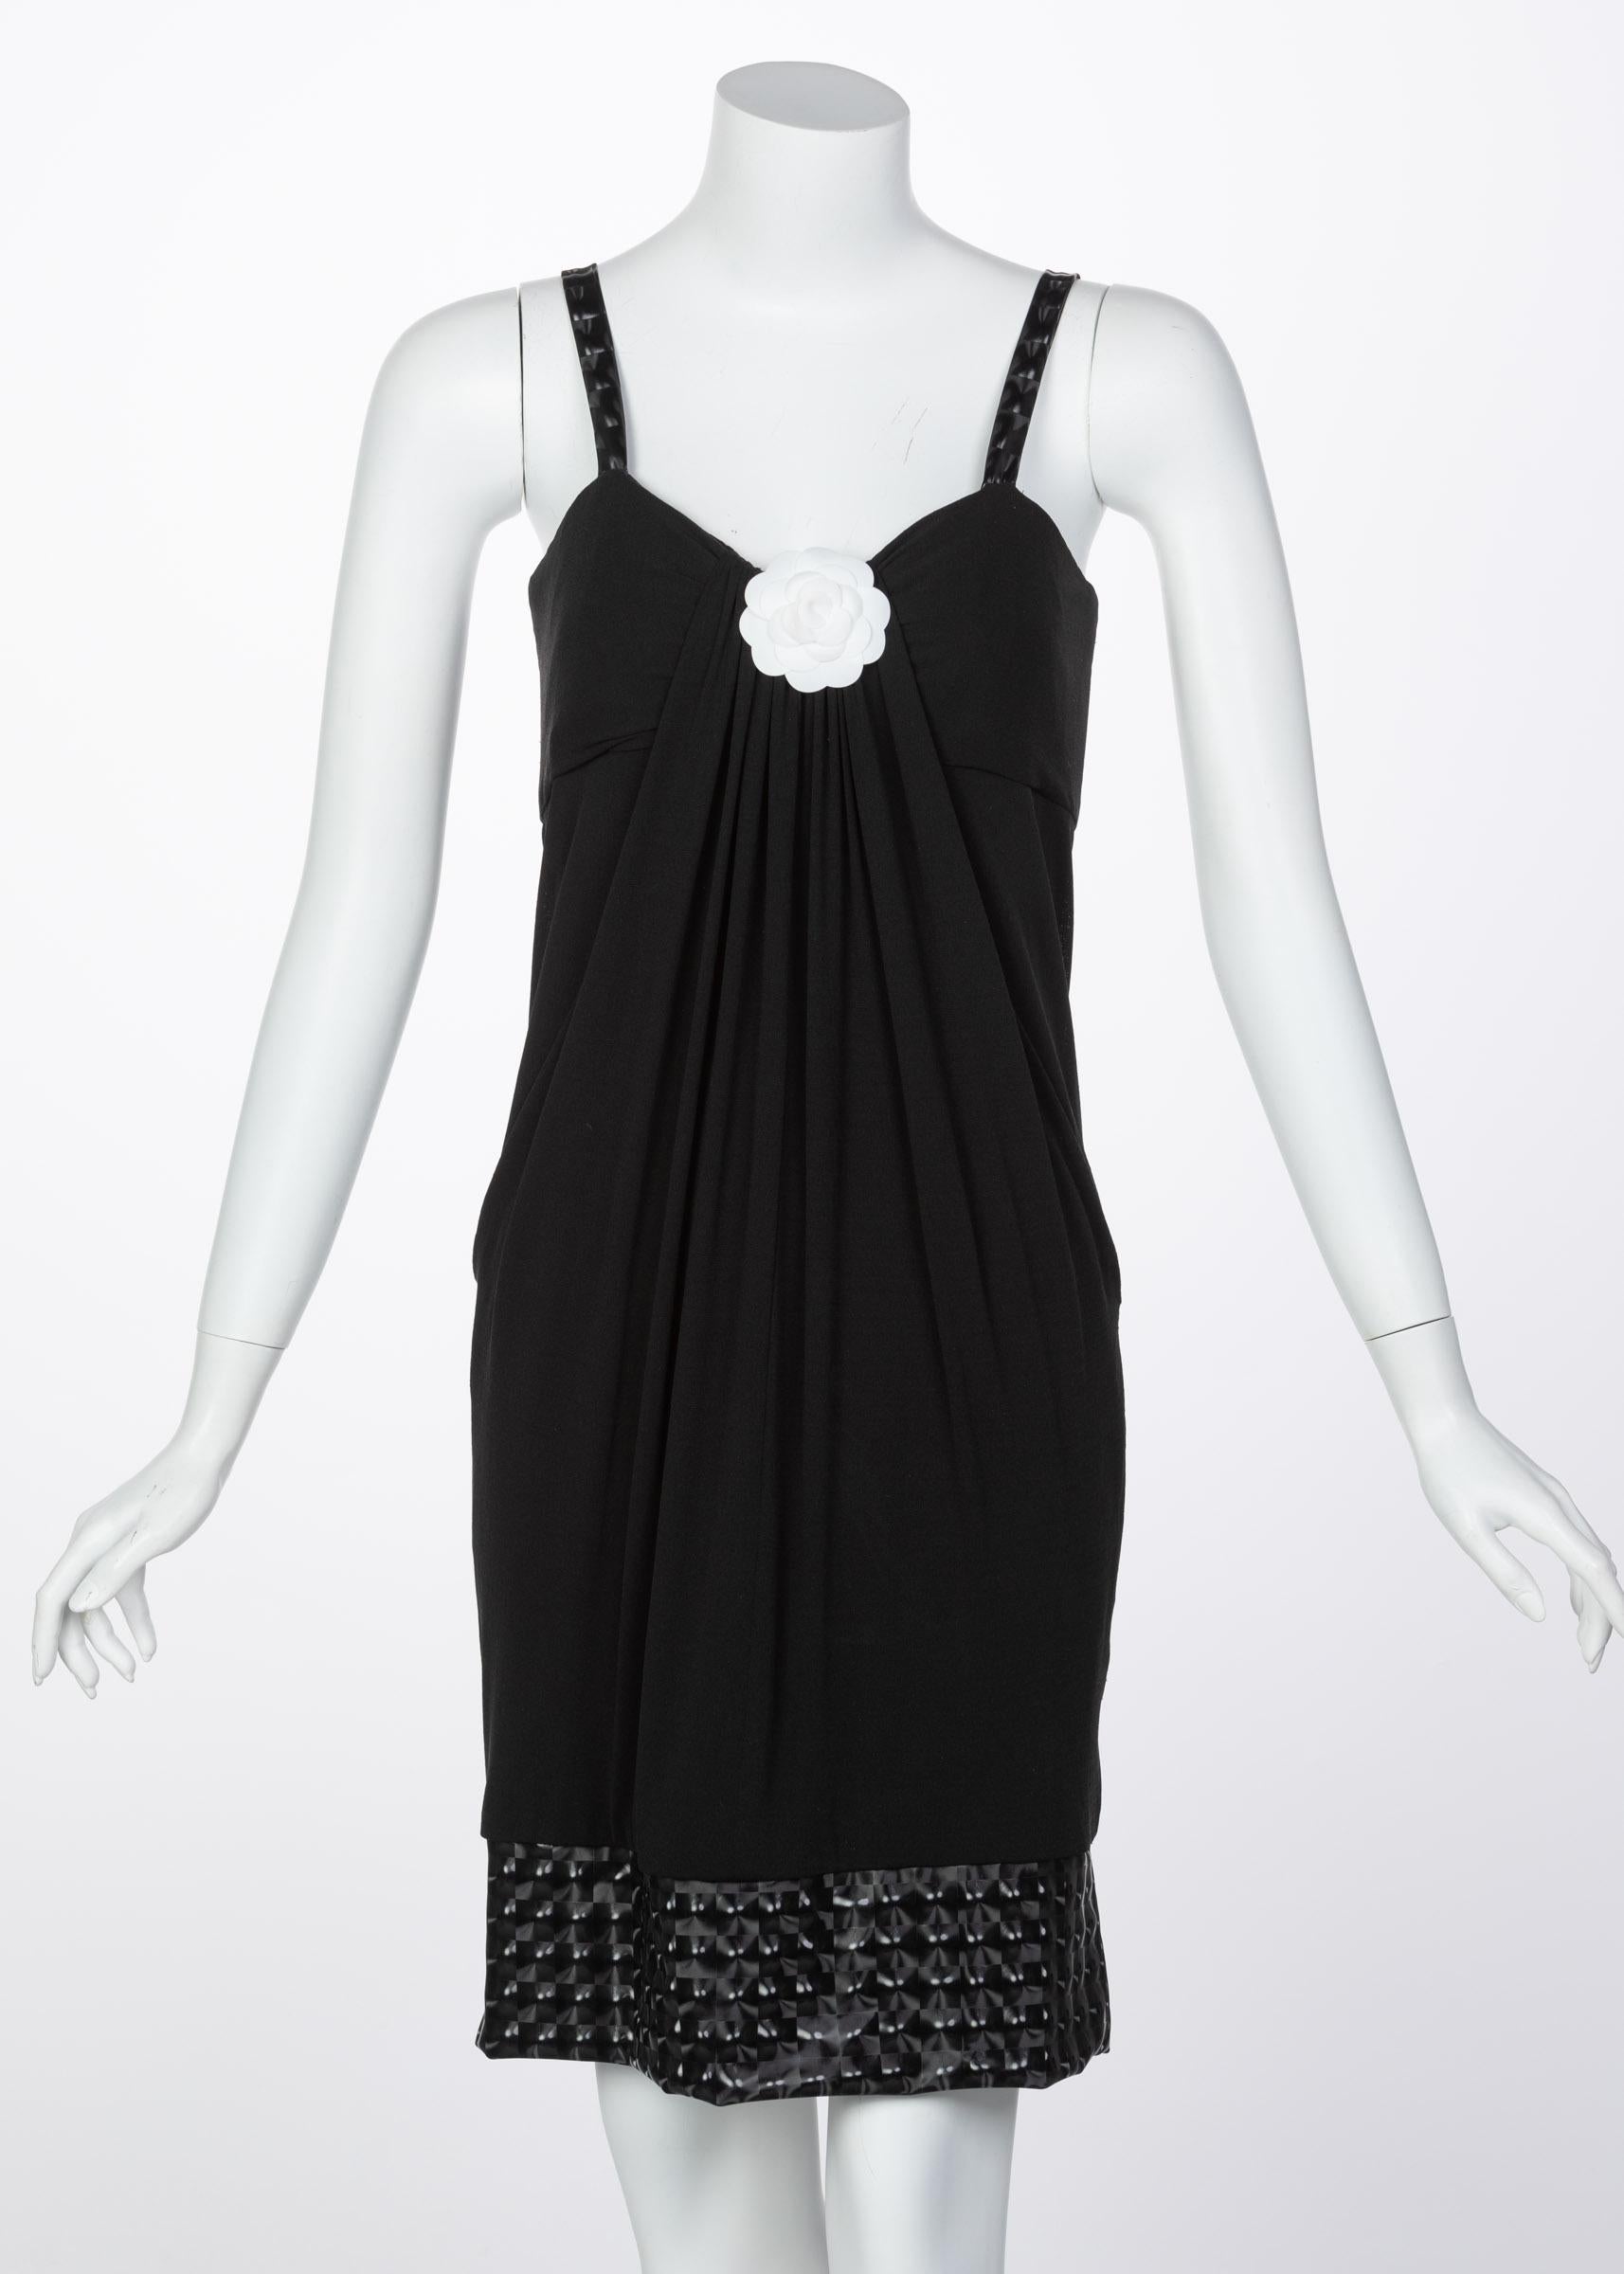 Chanel Sleeveless Black Cocktail Dress Camellia Laser Cut Bomber Jacket Set, In Excellent Condition In Boca Raton, FL